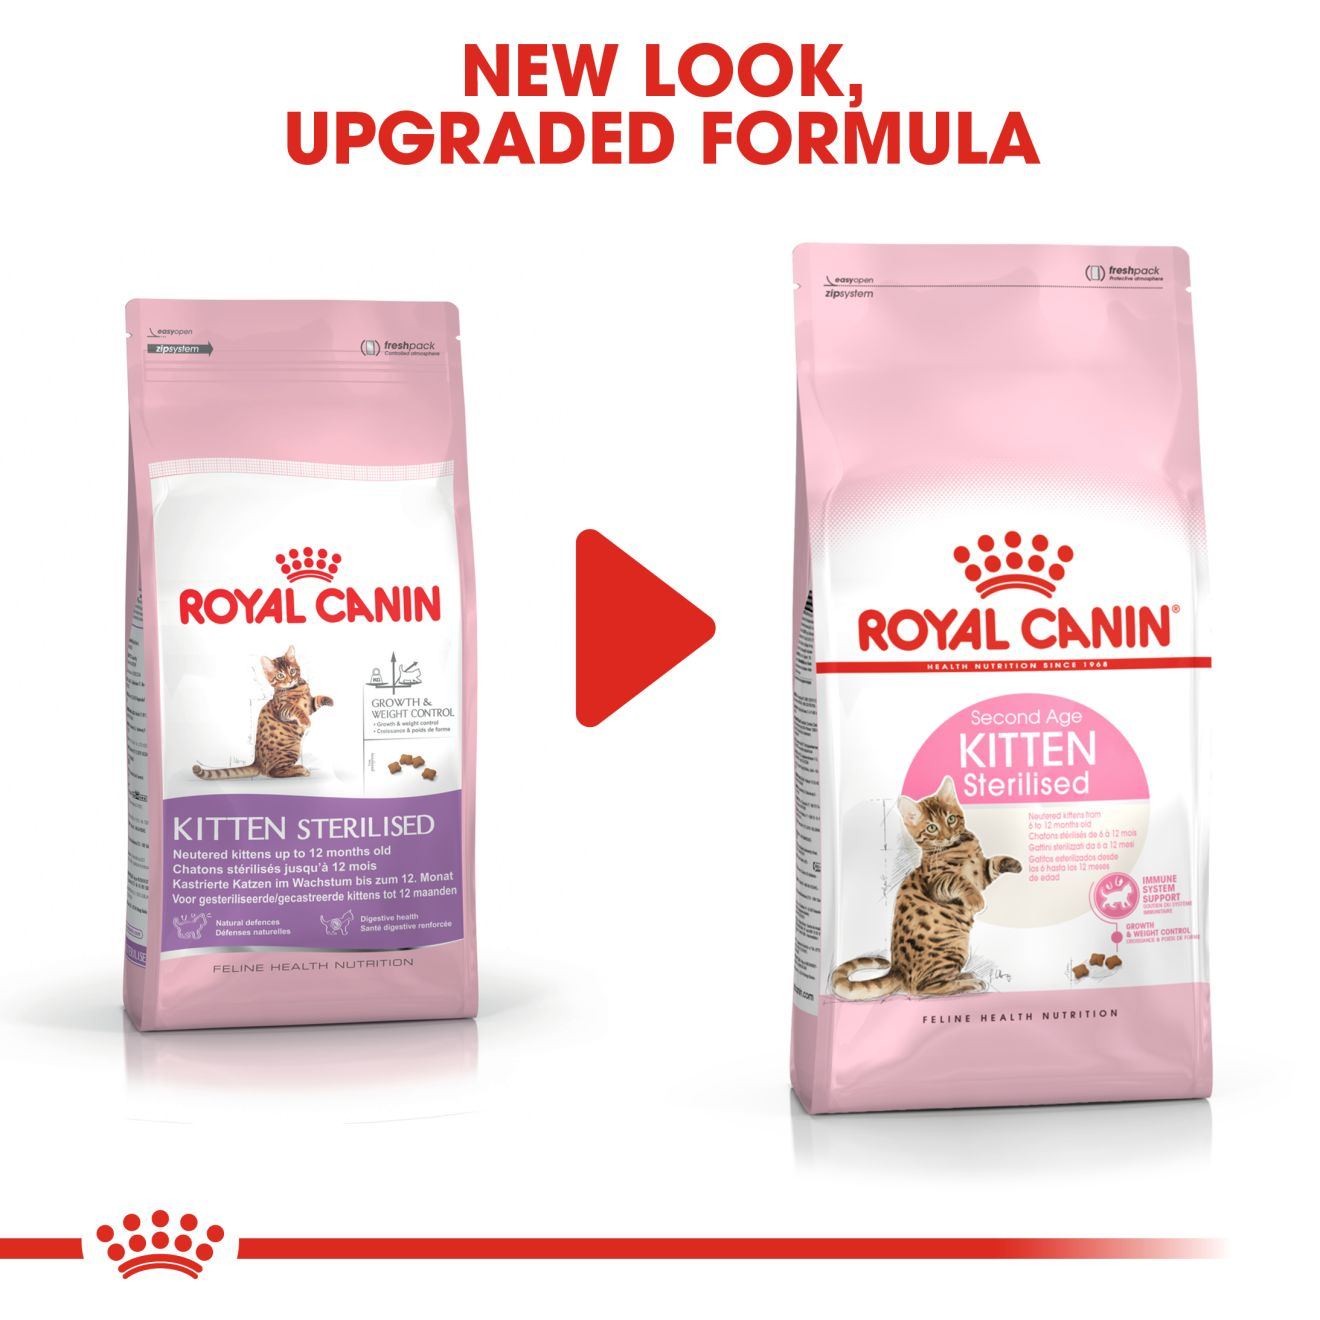 royal canin for sterilised cats